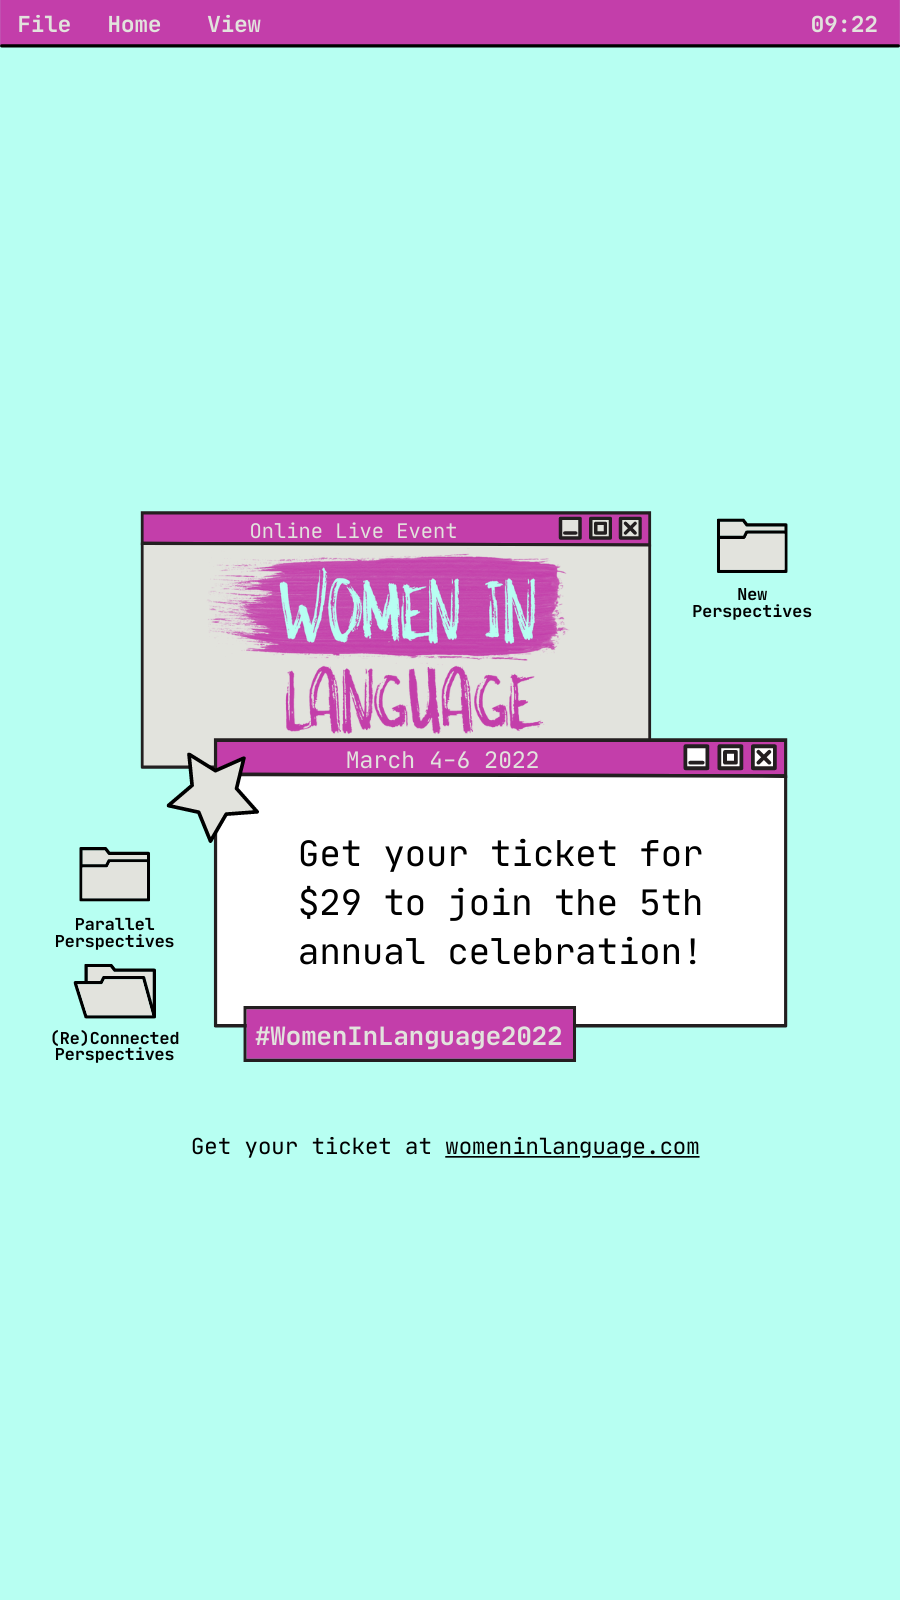 For a fifth consecutive year, Women In Language is back for 2022 to brighten up your March. Here's what's to expect at this year's Women In Language.